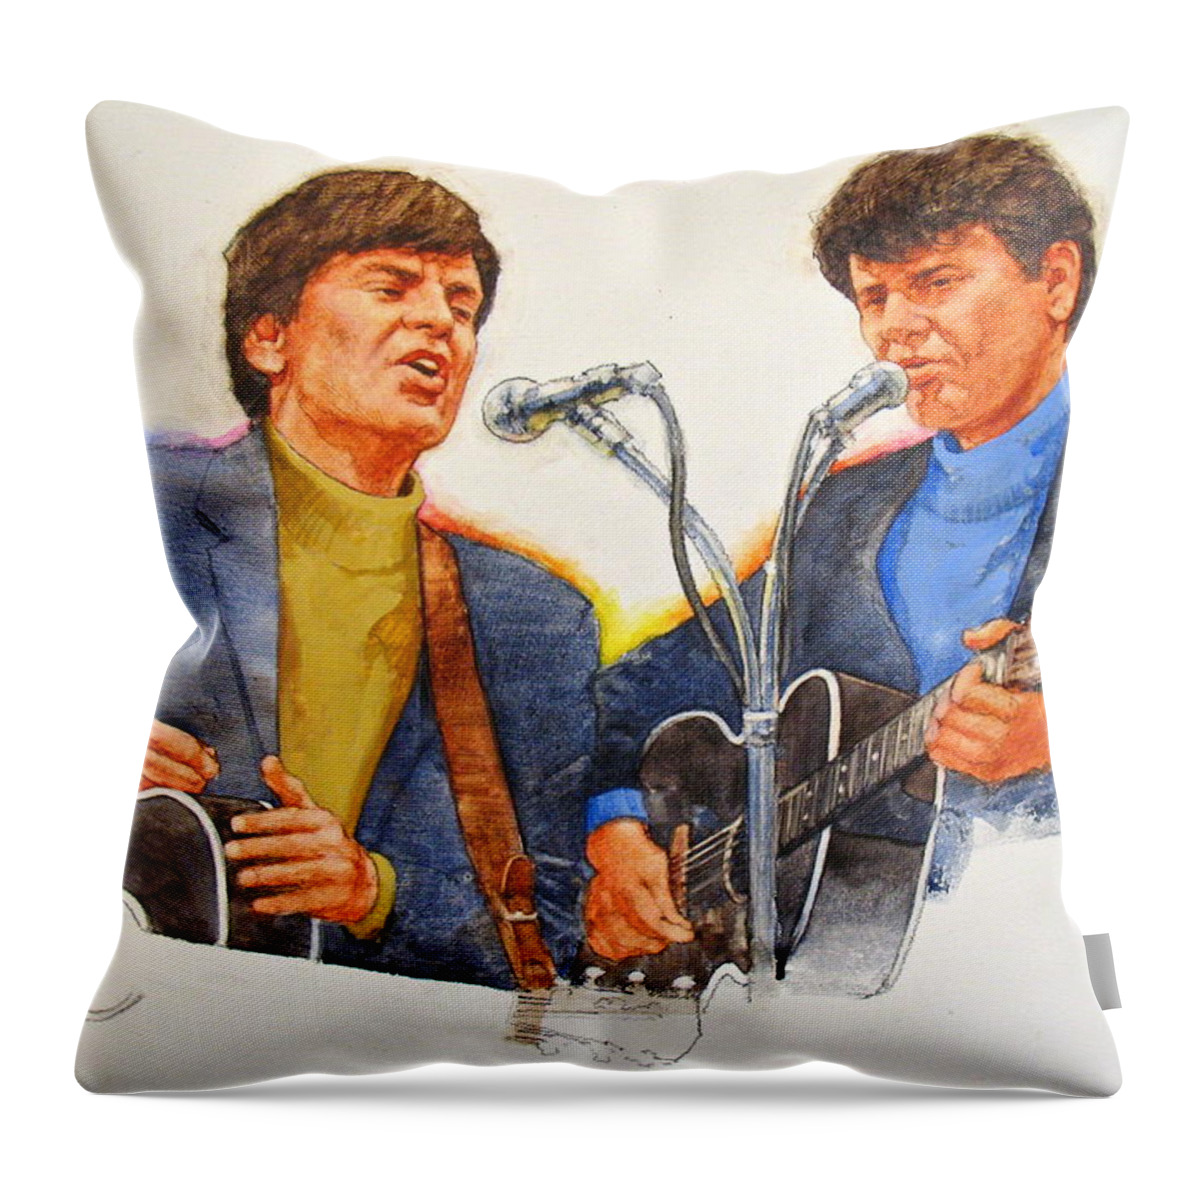 Acrylic Painting Throw Pillow featuring the painting Its Rock And Roll 4 - Everly Brothers by Cliff Spohn